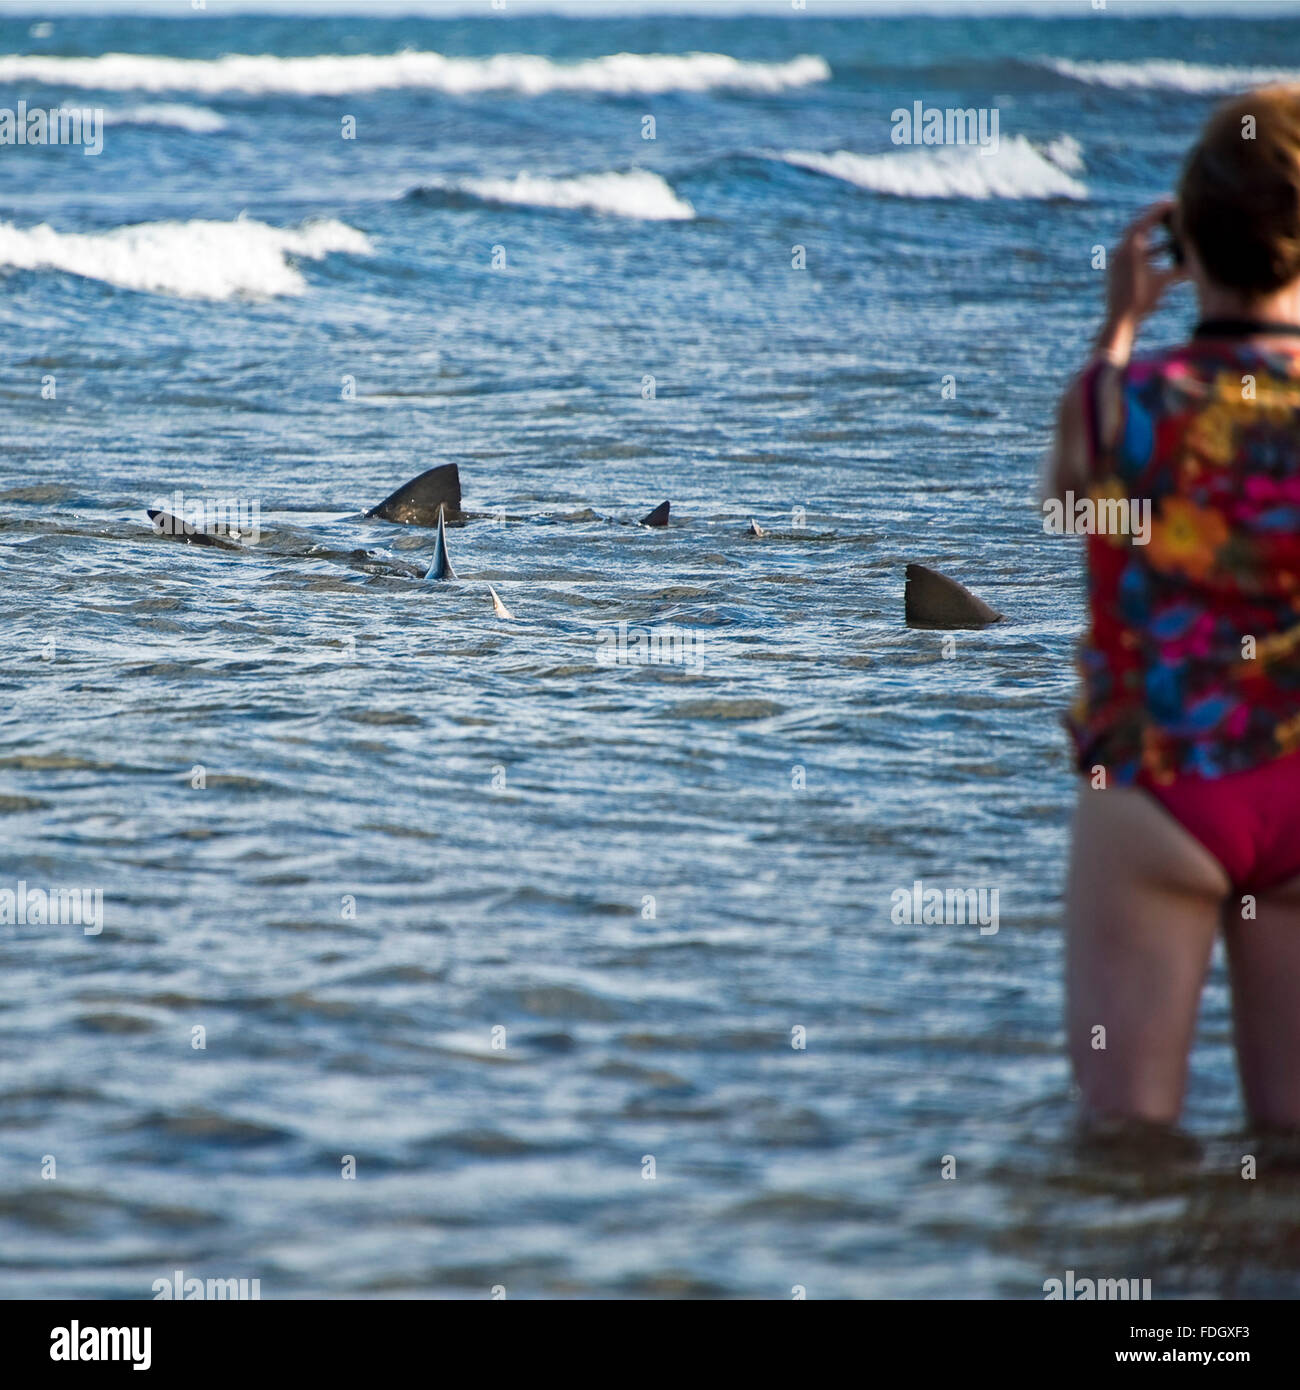 Square portrait of a tourist photographing lemon sharks swimming close to the beach Cape Stock Photo -